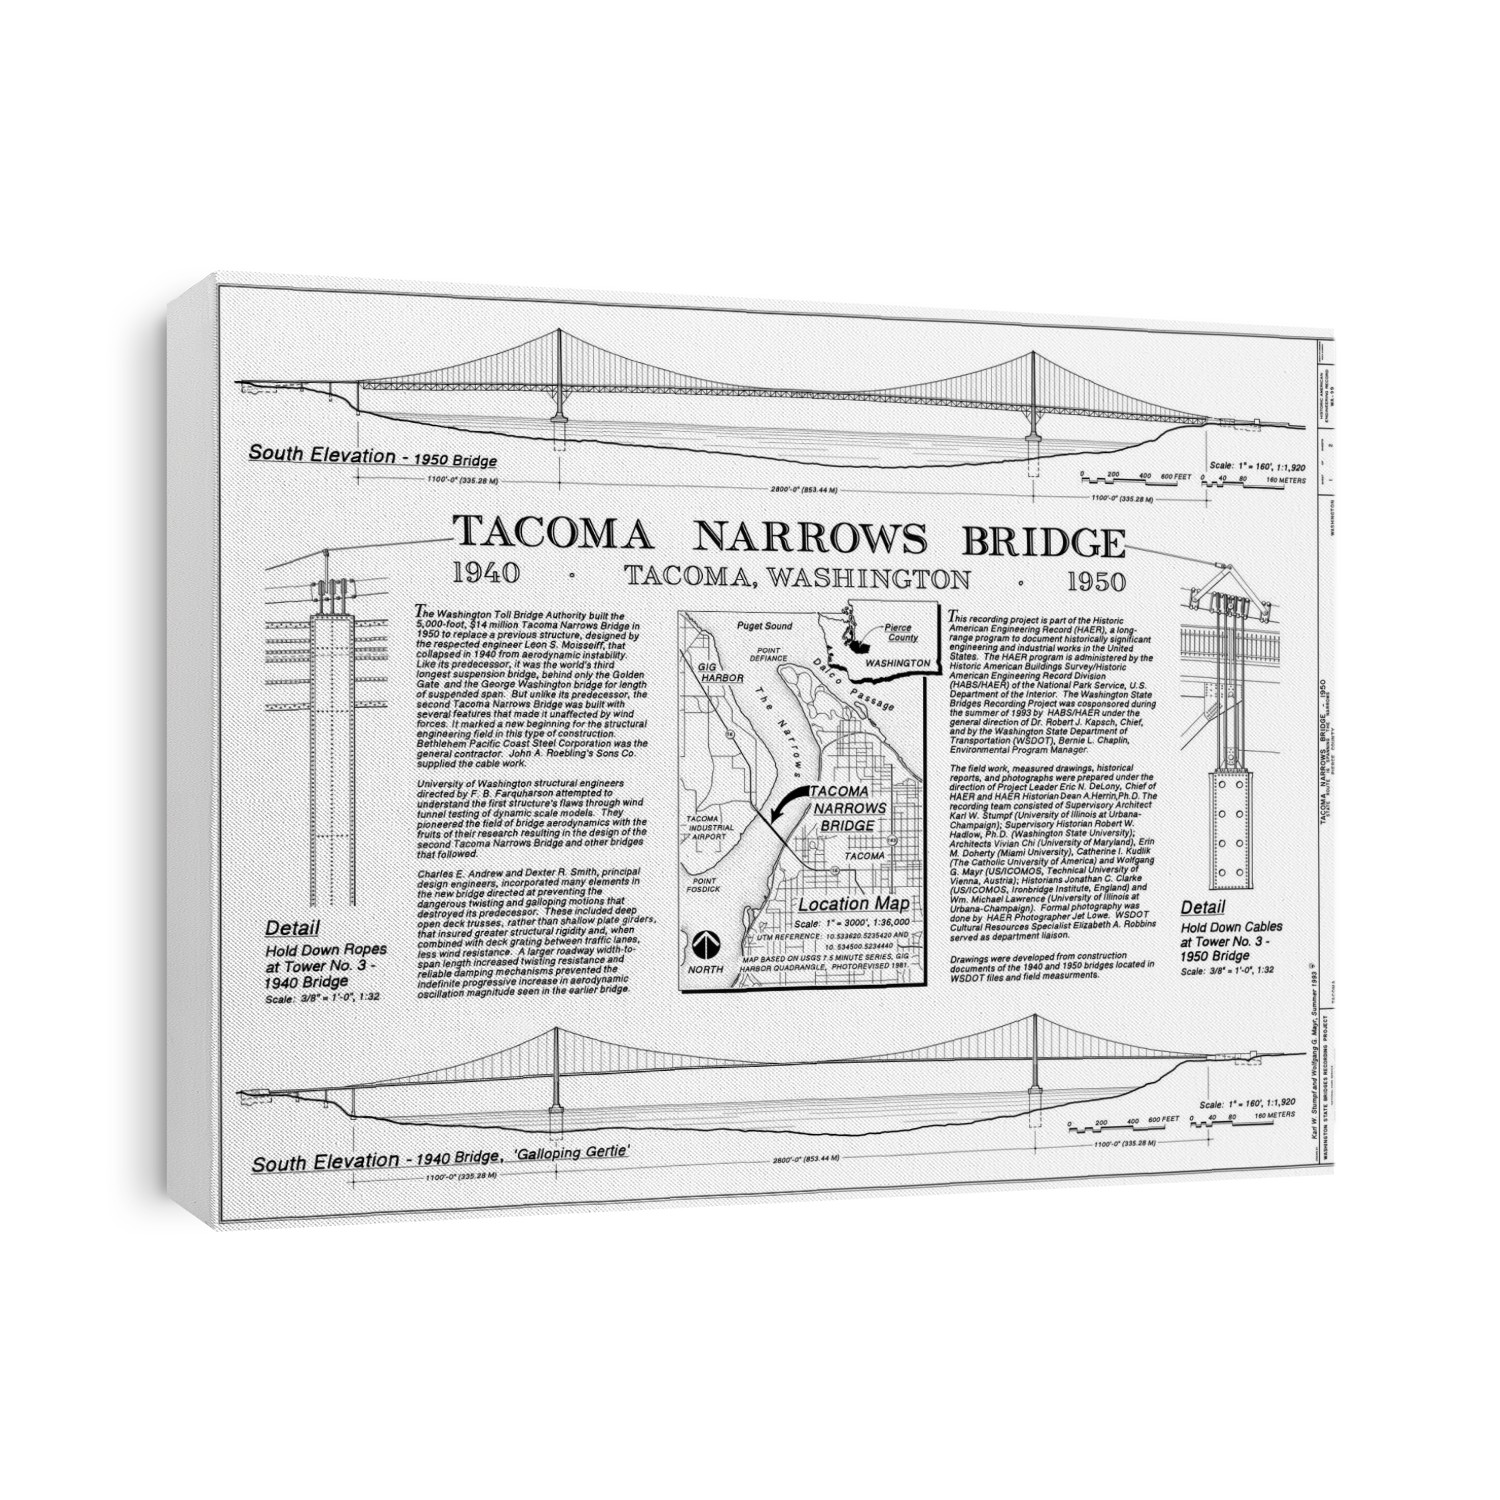 Tacoma Narrows bridges compared. Diagrams and text prepared by the Historic American Engineering Record (HAER) project in 1993 to document the differences between the two Tacoma Narrows bridges of 1940 (bottom) and 1950 (top). The 1940 bridge spanned 1810 metres across the Tacoma Narrows strait in Puget Sound, in the US state of Washington. It collapsed on 7 November 1940 due to aeroelastic flutter in gale-force winds. The replacement 1950 design included extra bracing, space for wind to pass through, and dampers, to prevent a repeat of the collapse. For the second set of diagrams, see C013/1945.